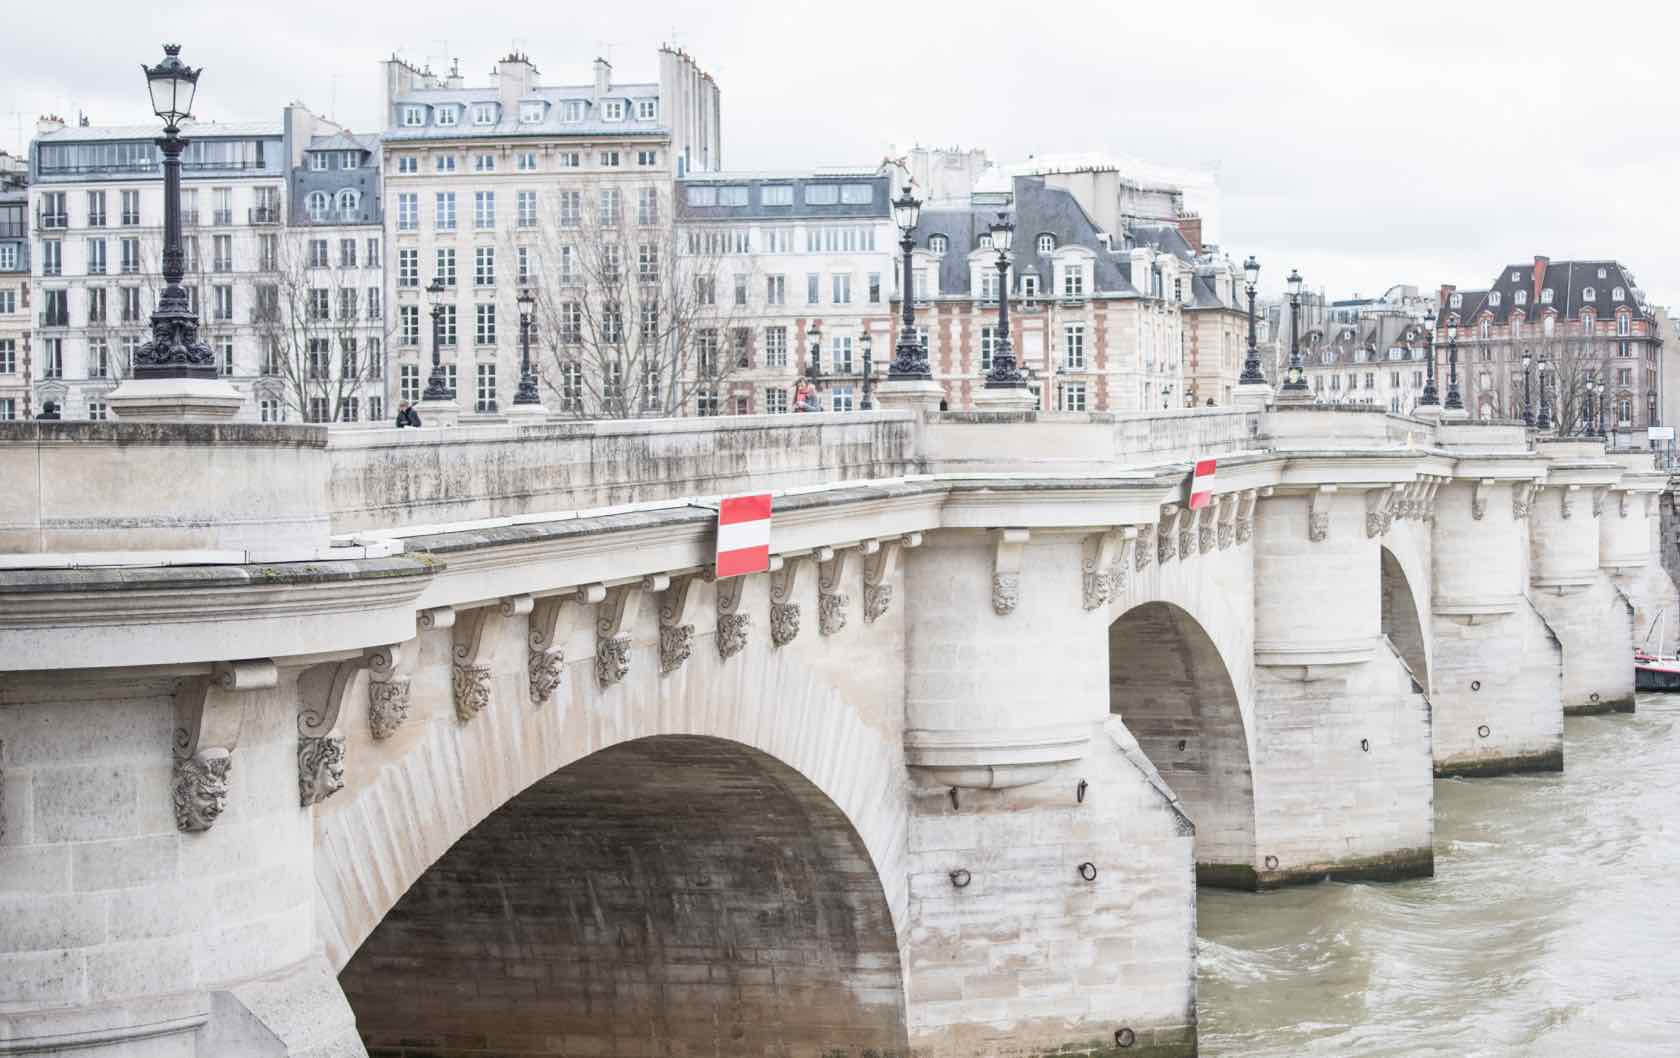 A Brief History of the Pont Neuf in Paris